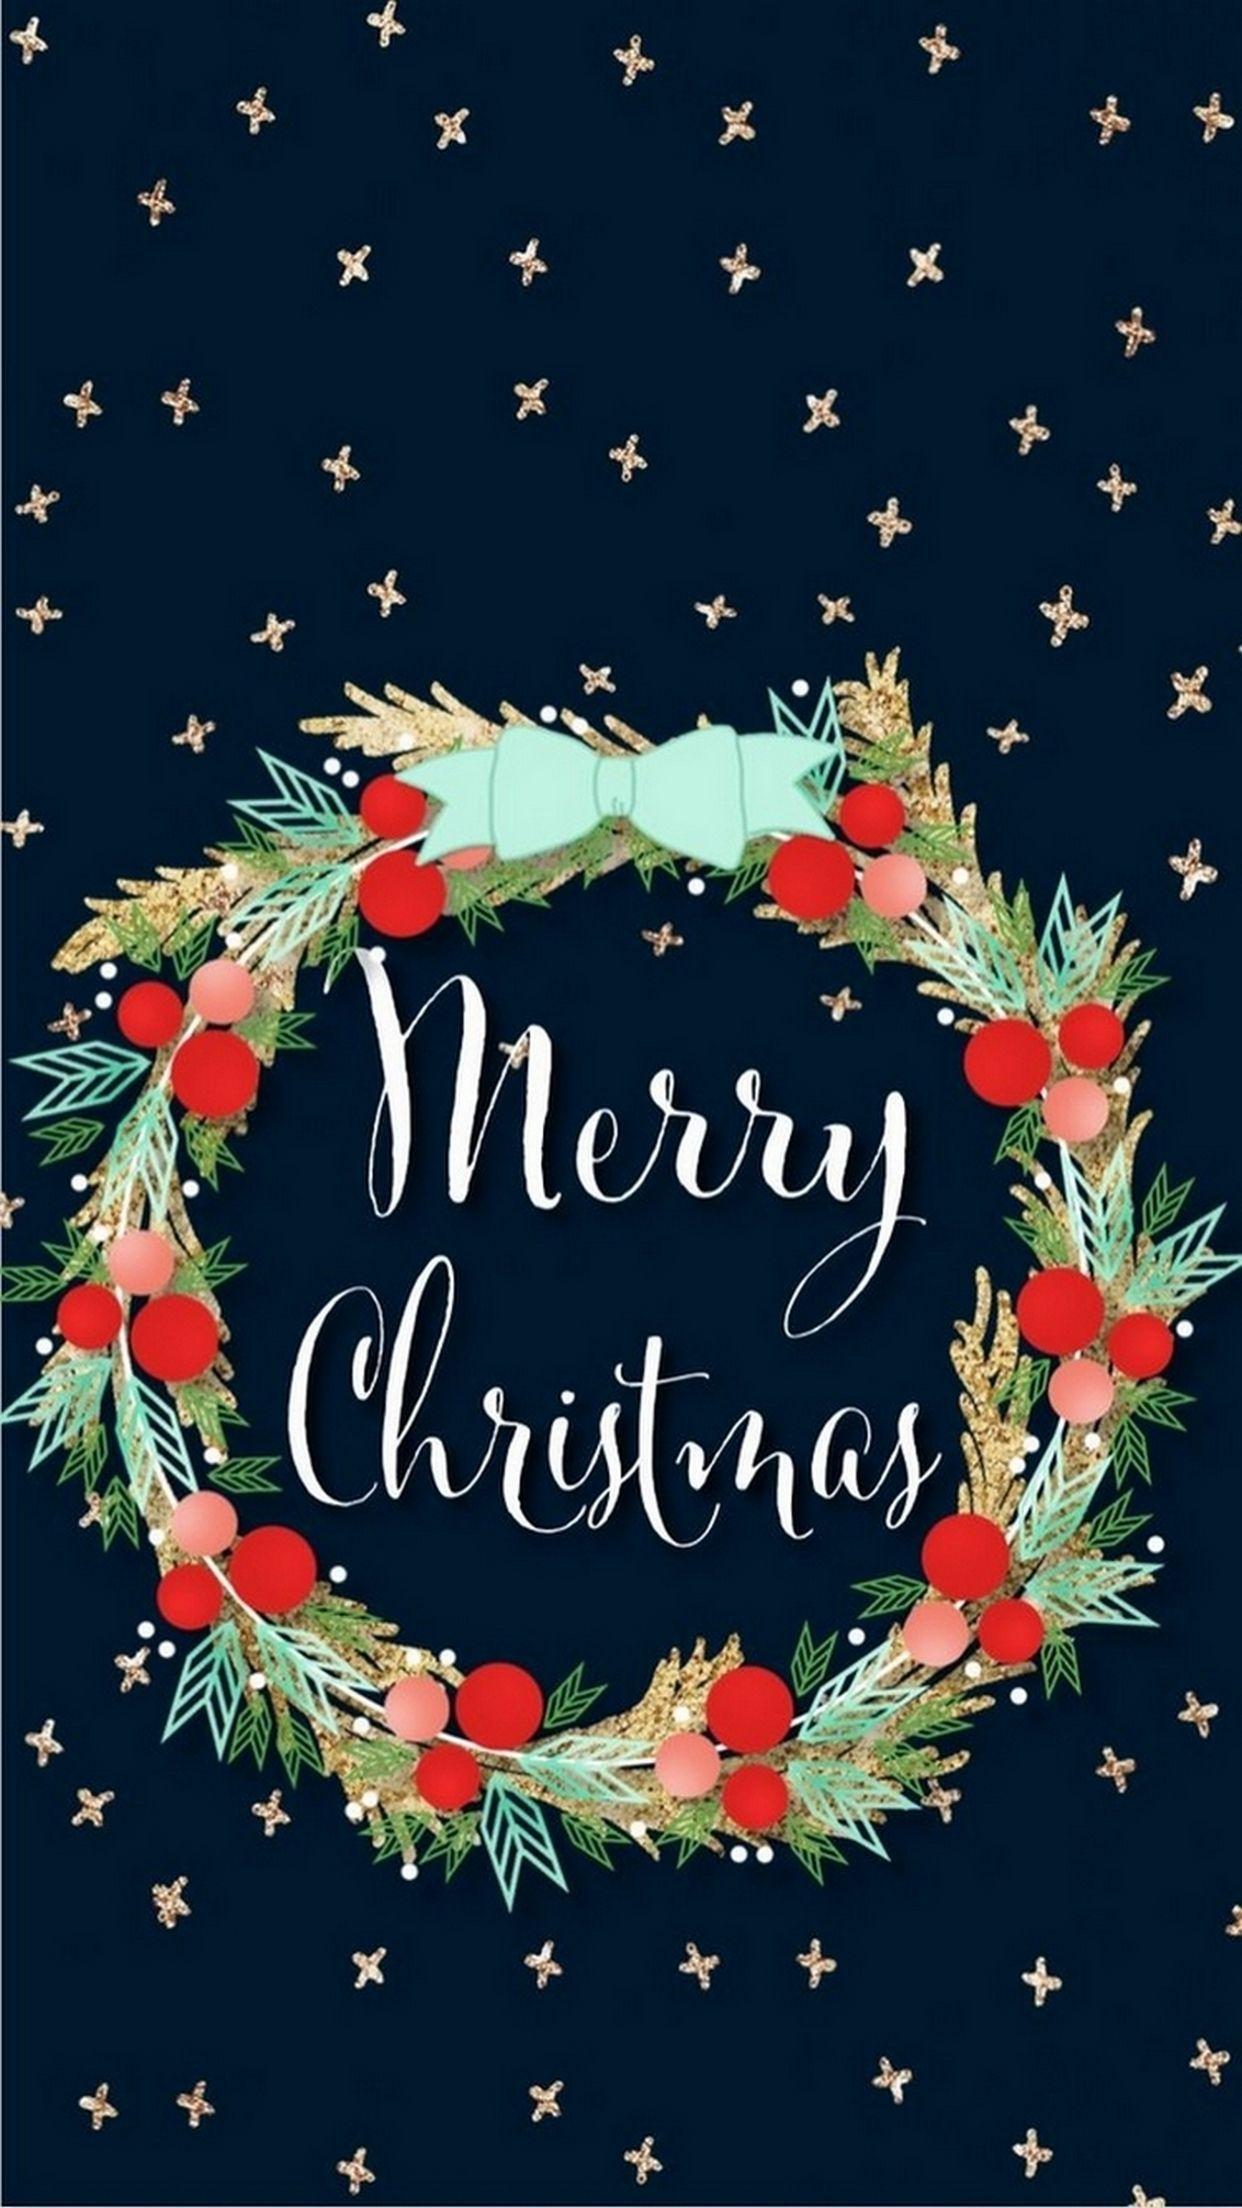 iPhone Merry Christmas Wallpapers - Wallpaper Cave